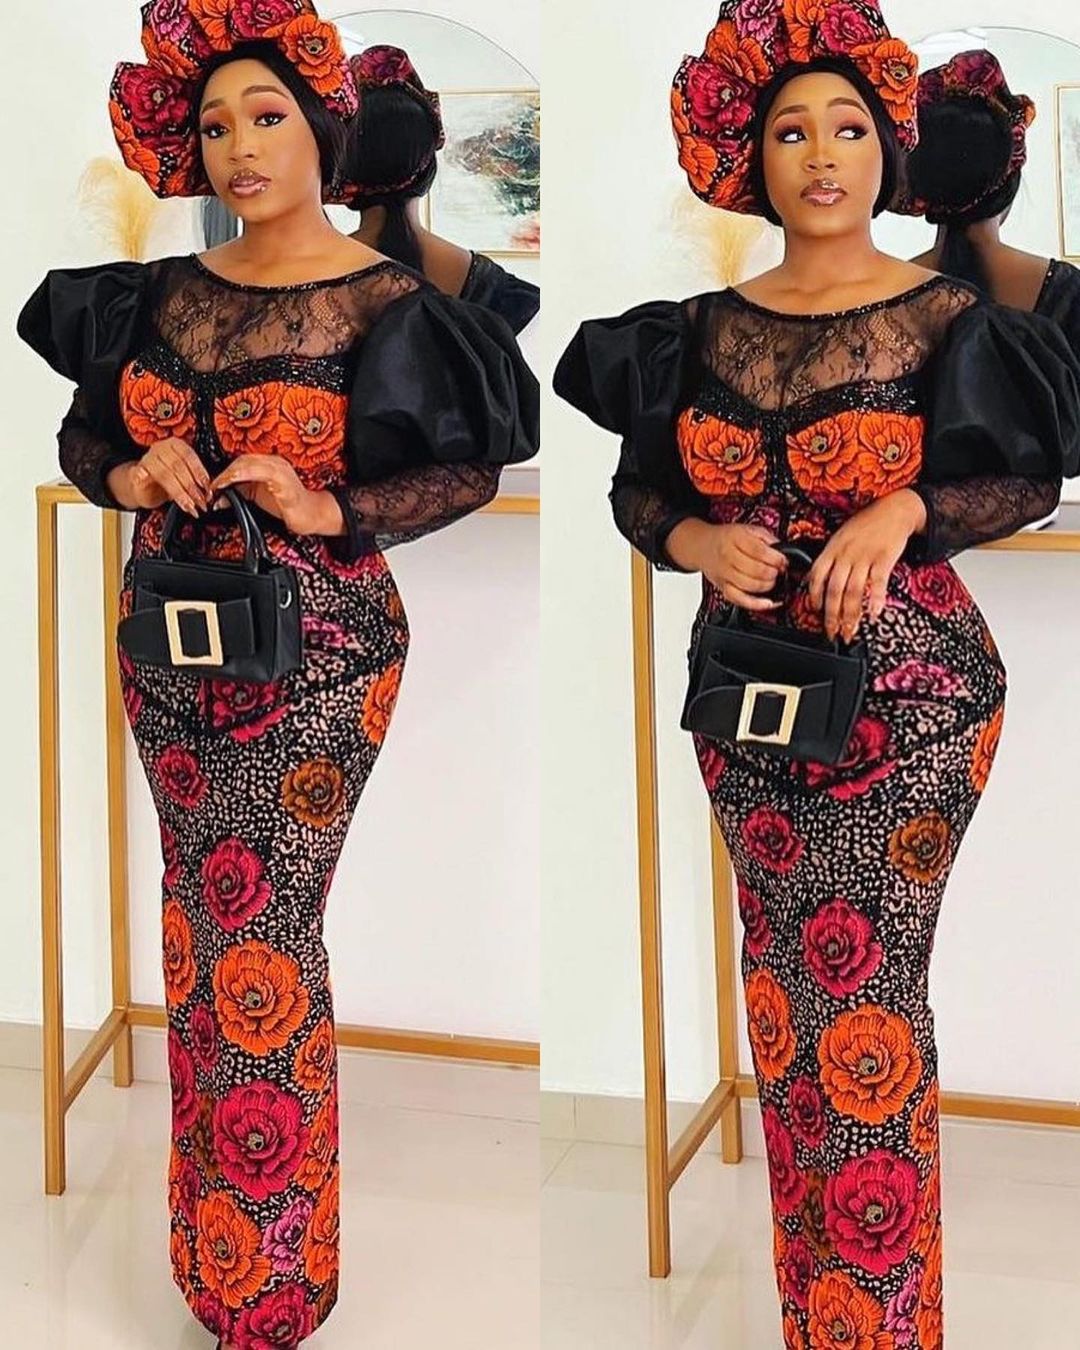 LOVELY ANKARA DRESSES AFRICAN OUTFITS WE ALL LOVE